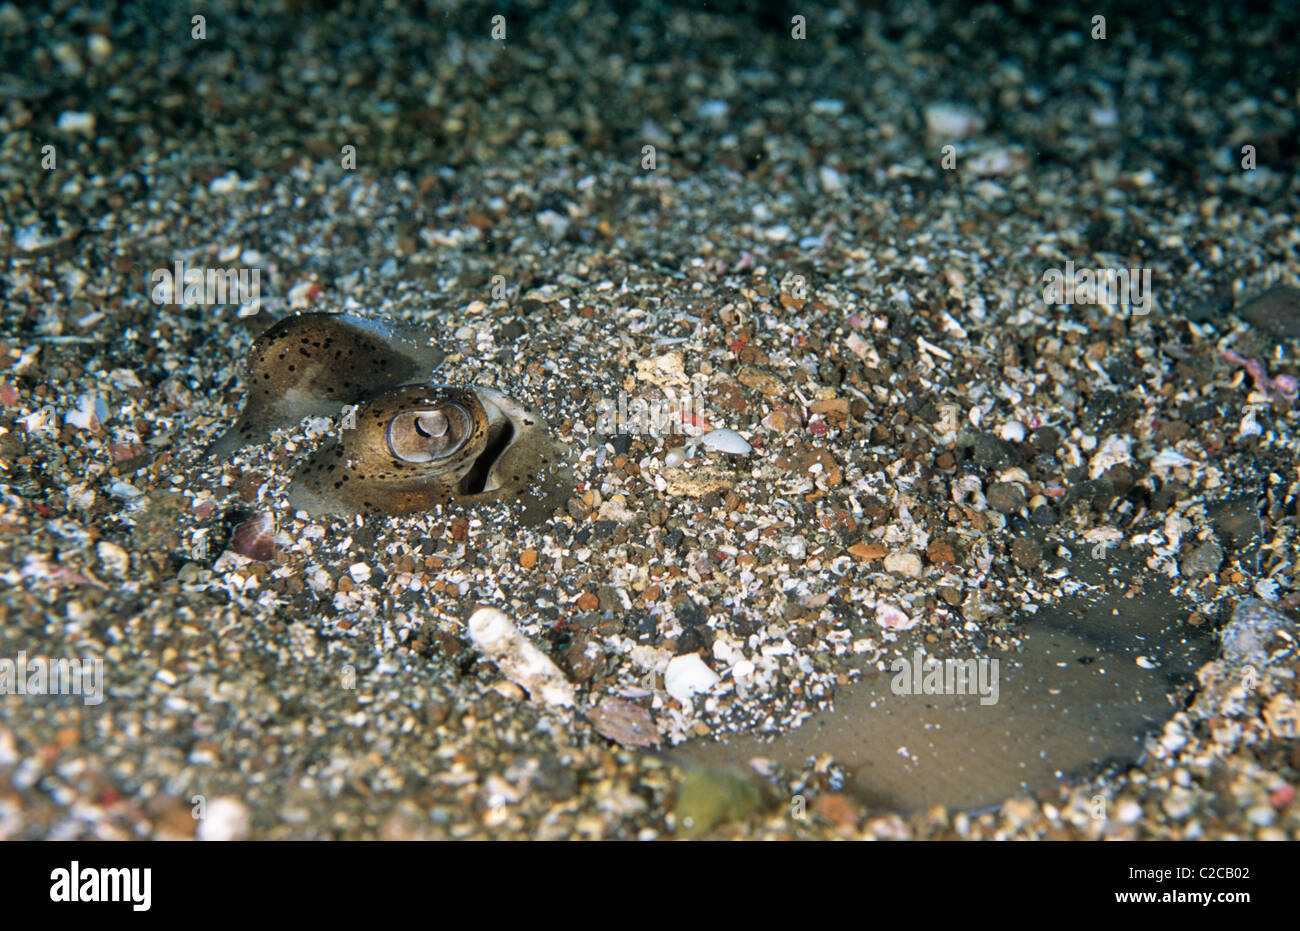 Blue-spotted Fantail Ray, Taeniura lymna, buried in sand, Lembeh Straits, near Bitung, Sulawesi, Indonesia, Asia Stock Photo